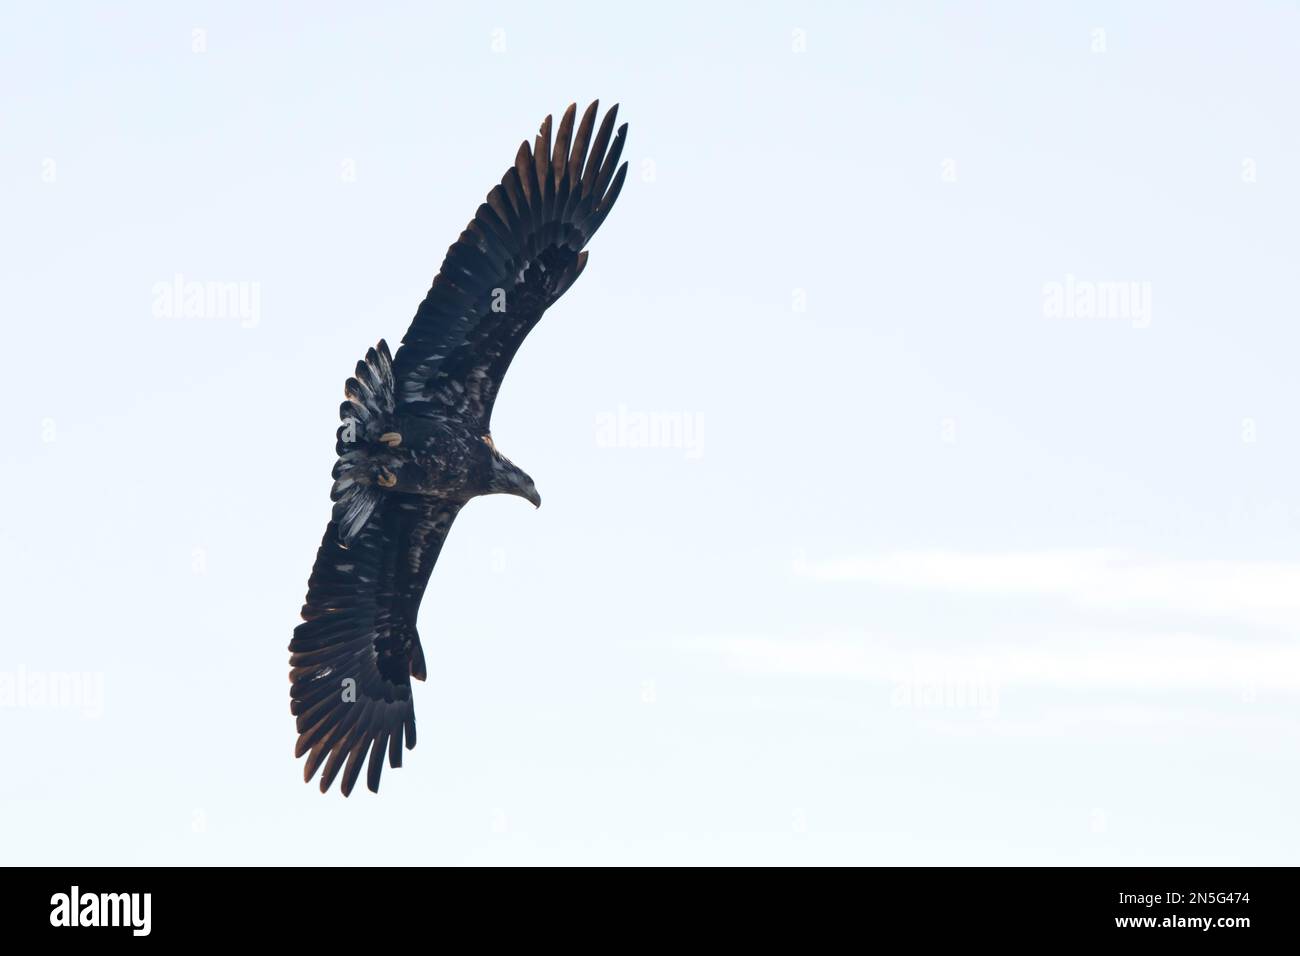 Juvenile bald eagle in flight in Davenport, Iowa on a winter day Stock Photo